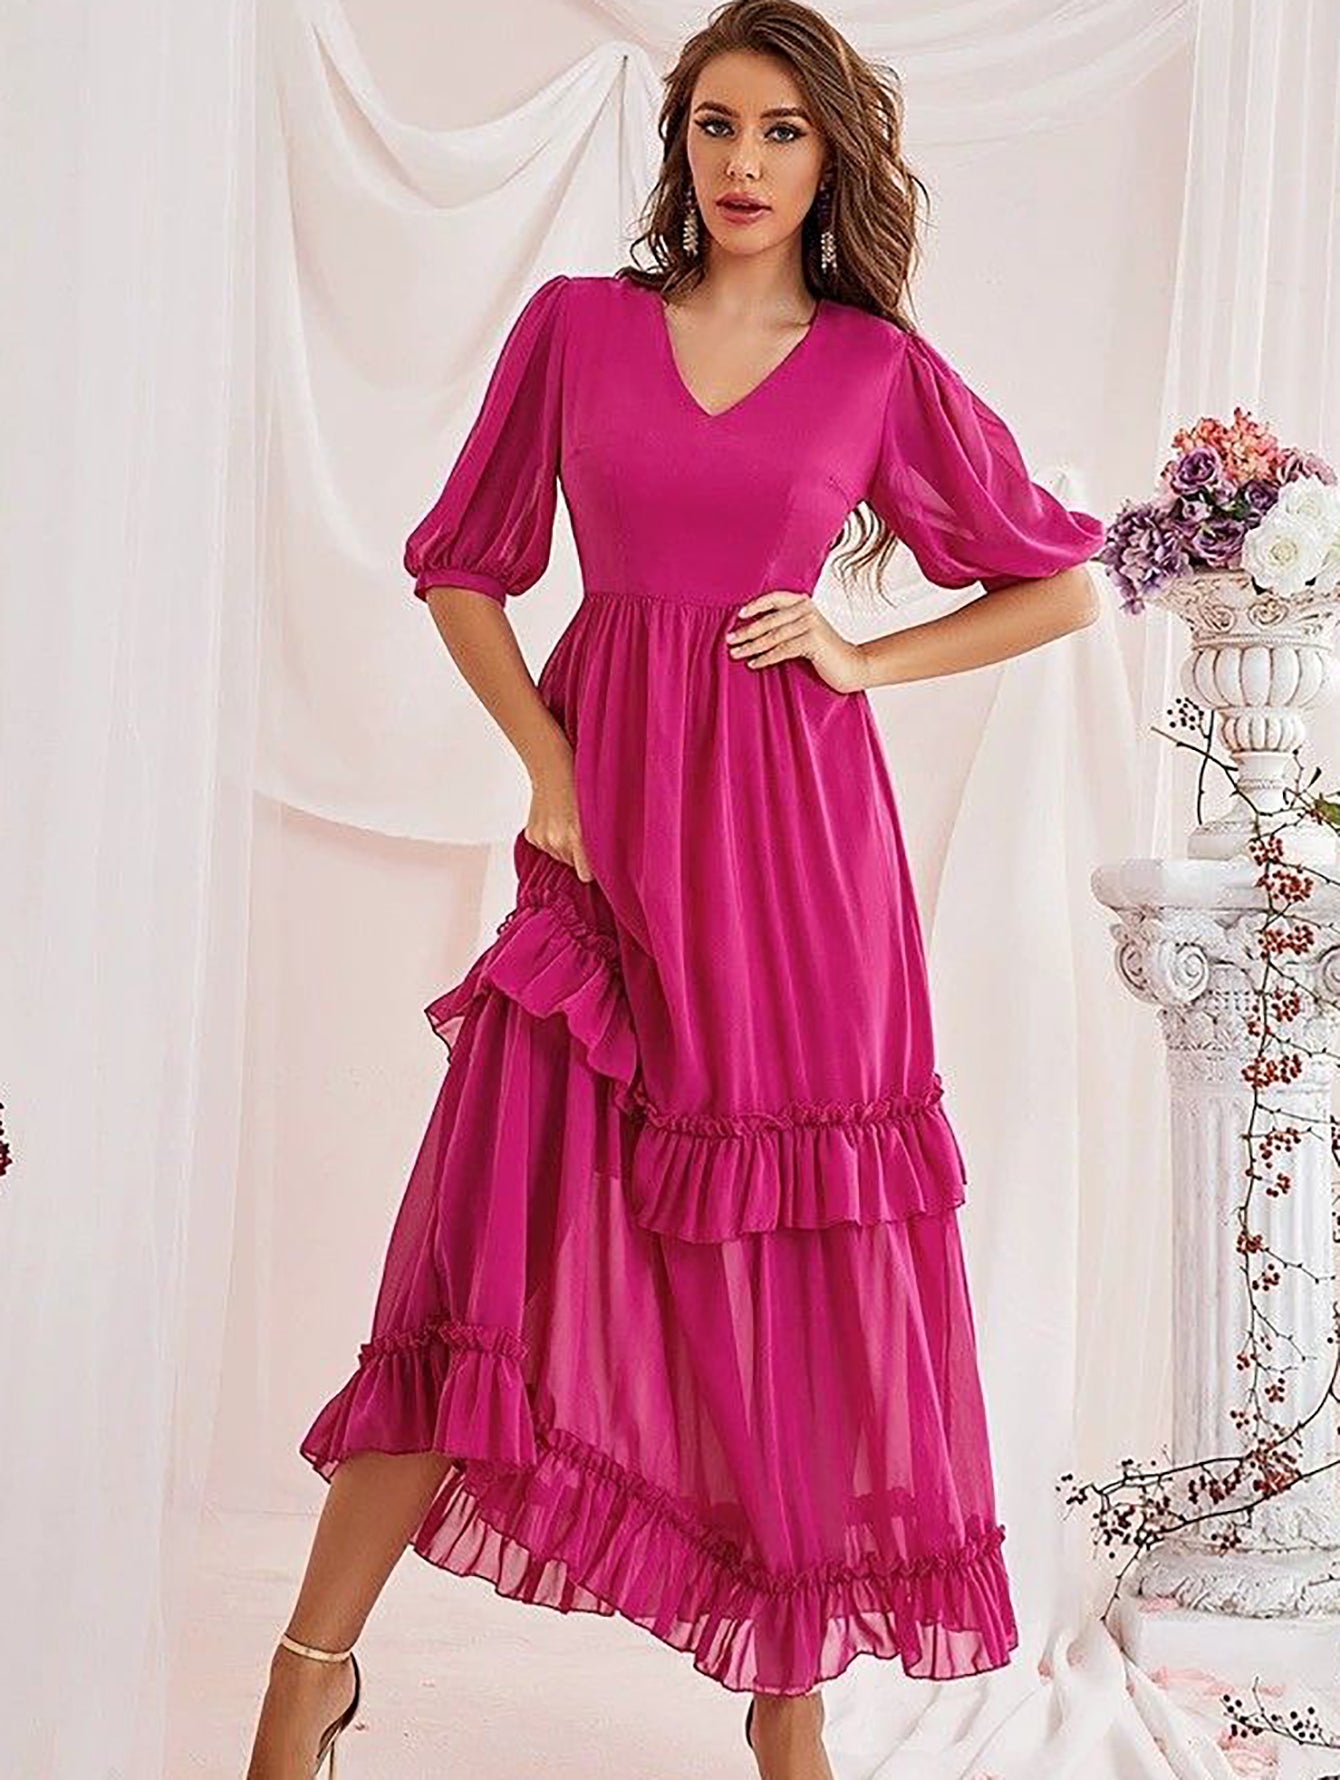 Pink Layered Long Dress With Short Sleeves